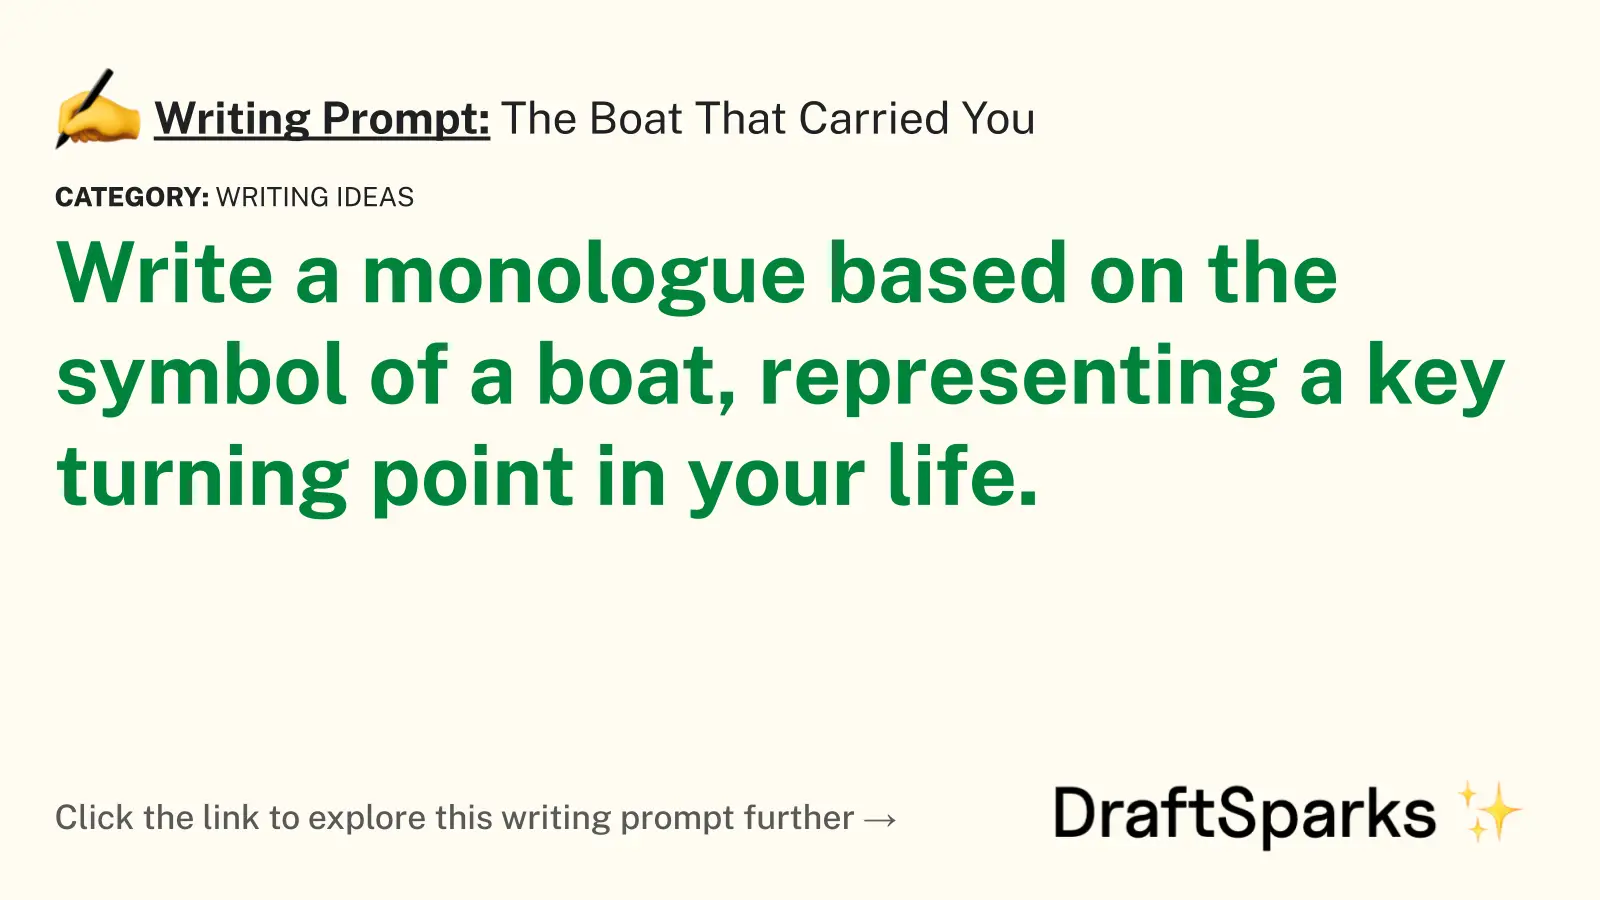 The Boat That Carried You